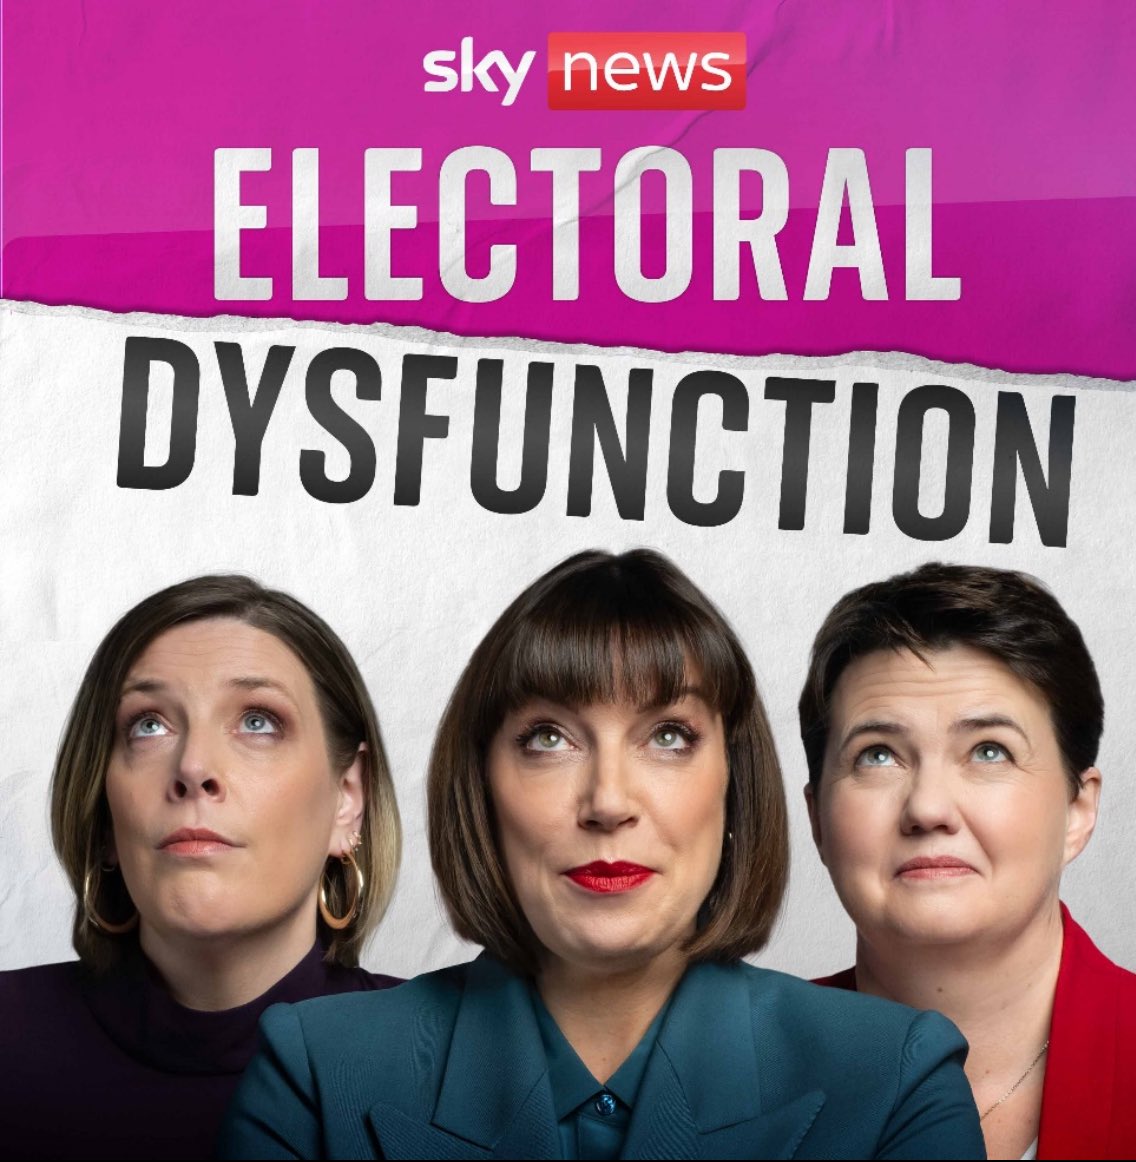 🚨Move over lads! So excited to launch our new @skynews podcast with me & two of the most straight talking, no BS women in British politics to talk elections & more 🚨 Electoral Dysfunction launches March 1 with me, @RuthDavidsonPC &  @jessphillips 👉thetimes.co.uk/article/9a8bed…